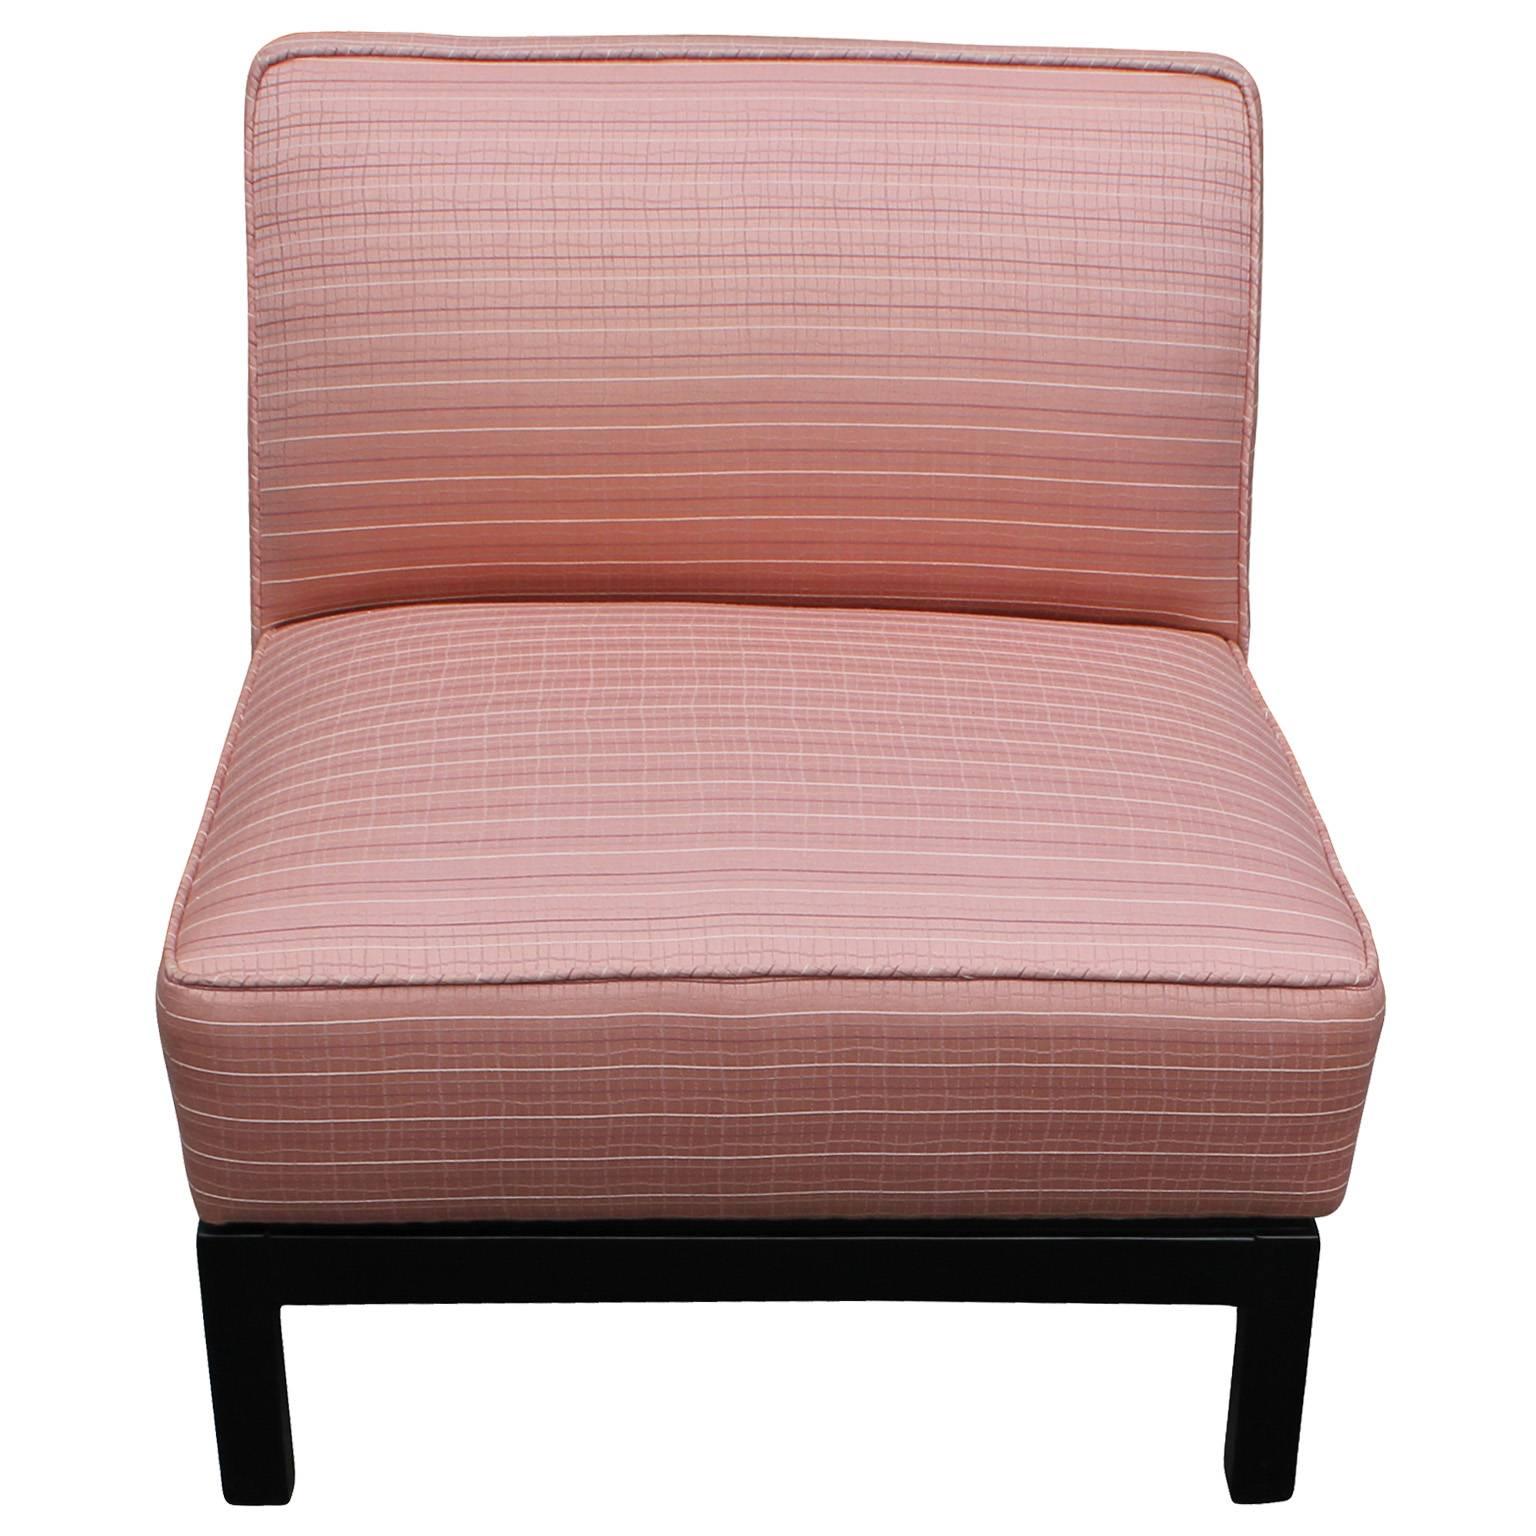 American Pair of Clean Lined Modern Slipper Chairs in Light Pink with Deep Walnut Bases